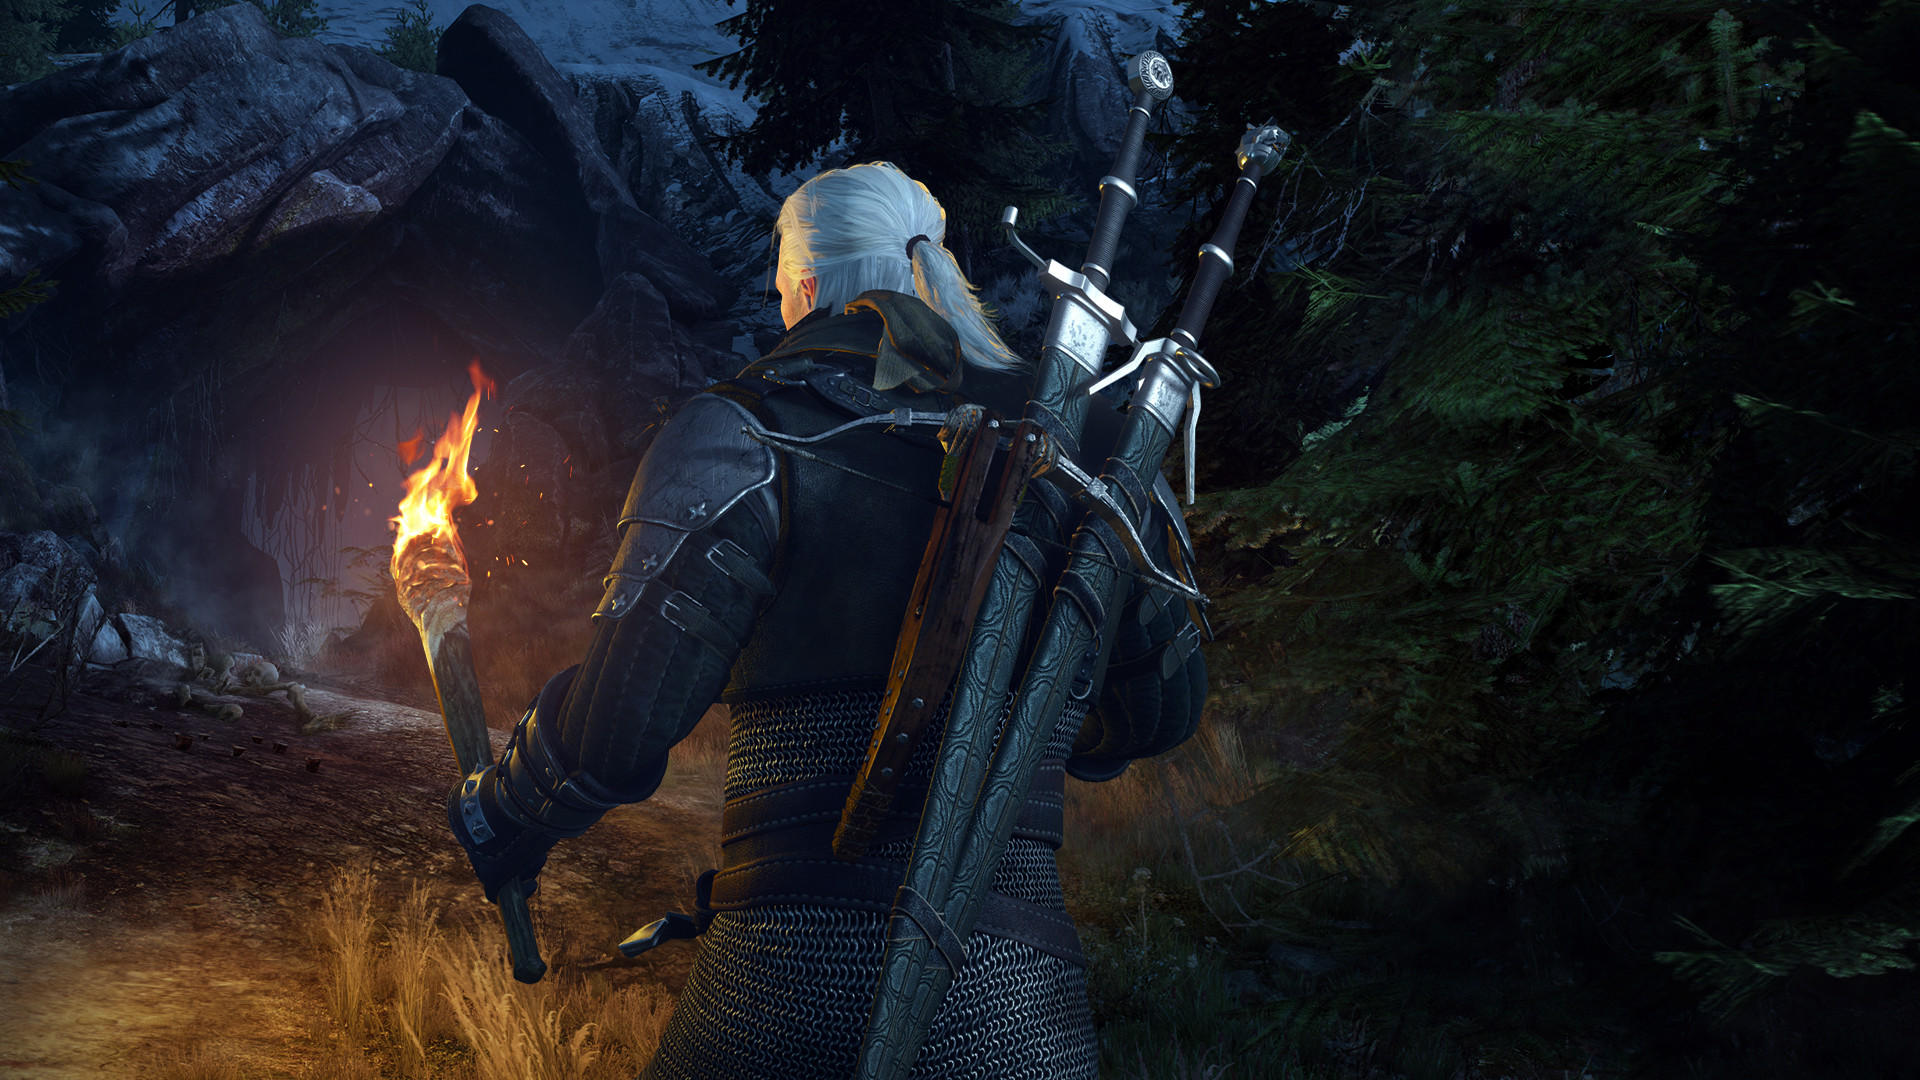 The Witcher 3: Wild Hunt - New Quest 'Contract: Missing Miners' Featured Screenshot #1